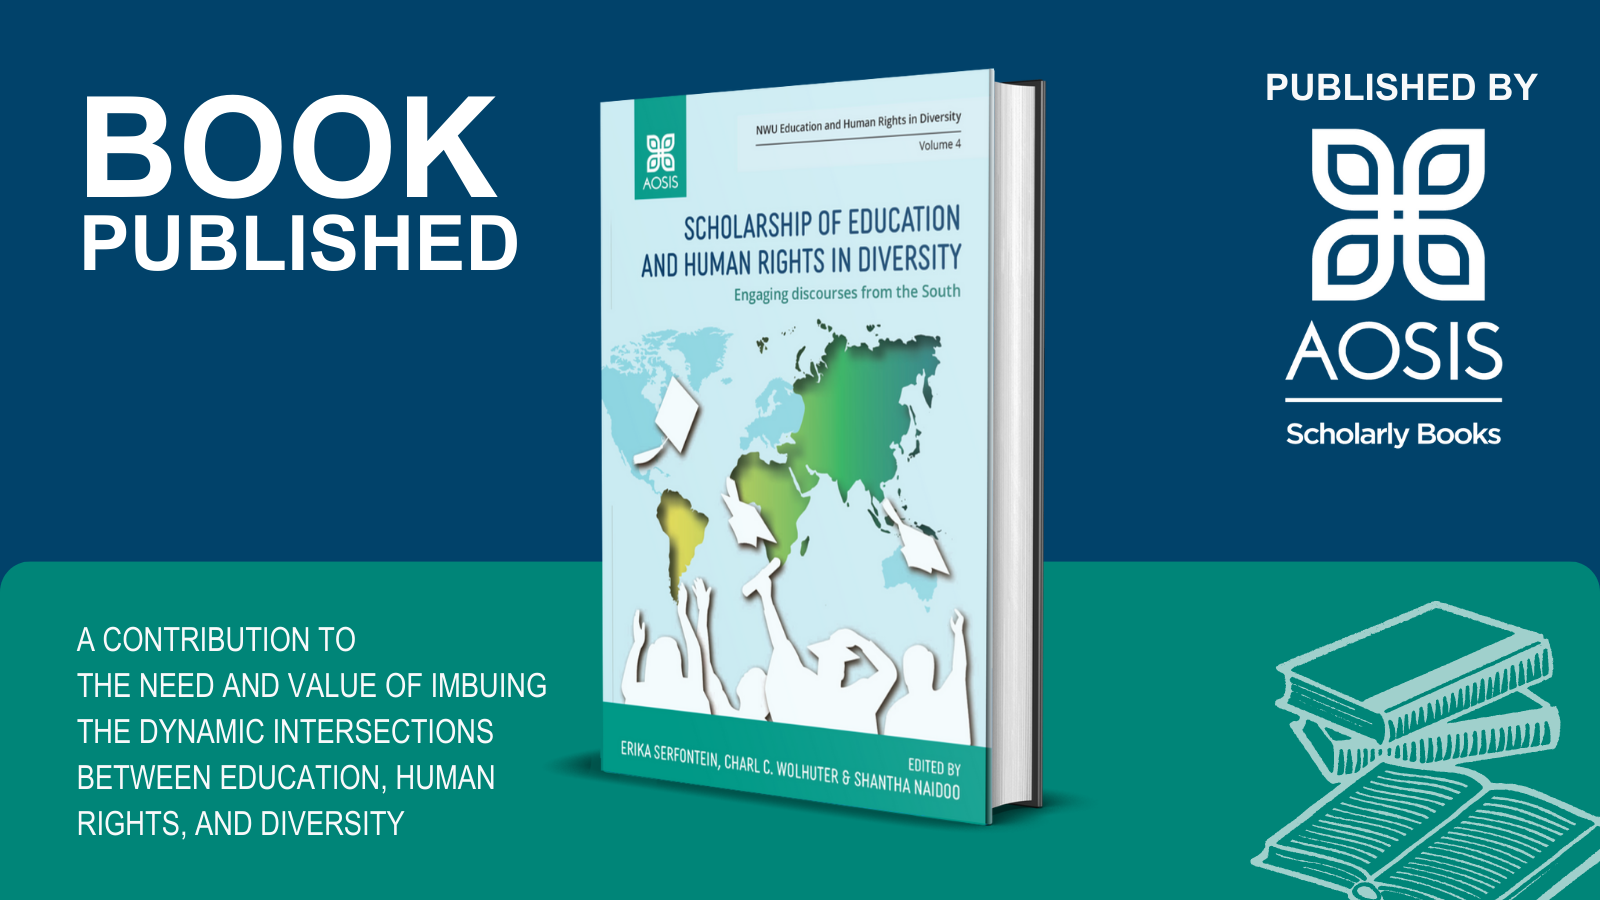 AOSIS Books publishes ‘Scholarship of education and human rights in diversity’